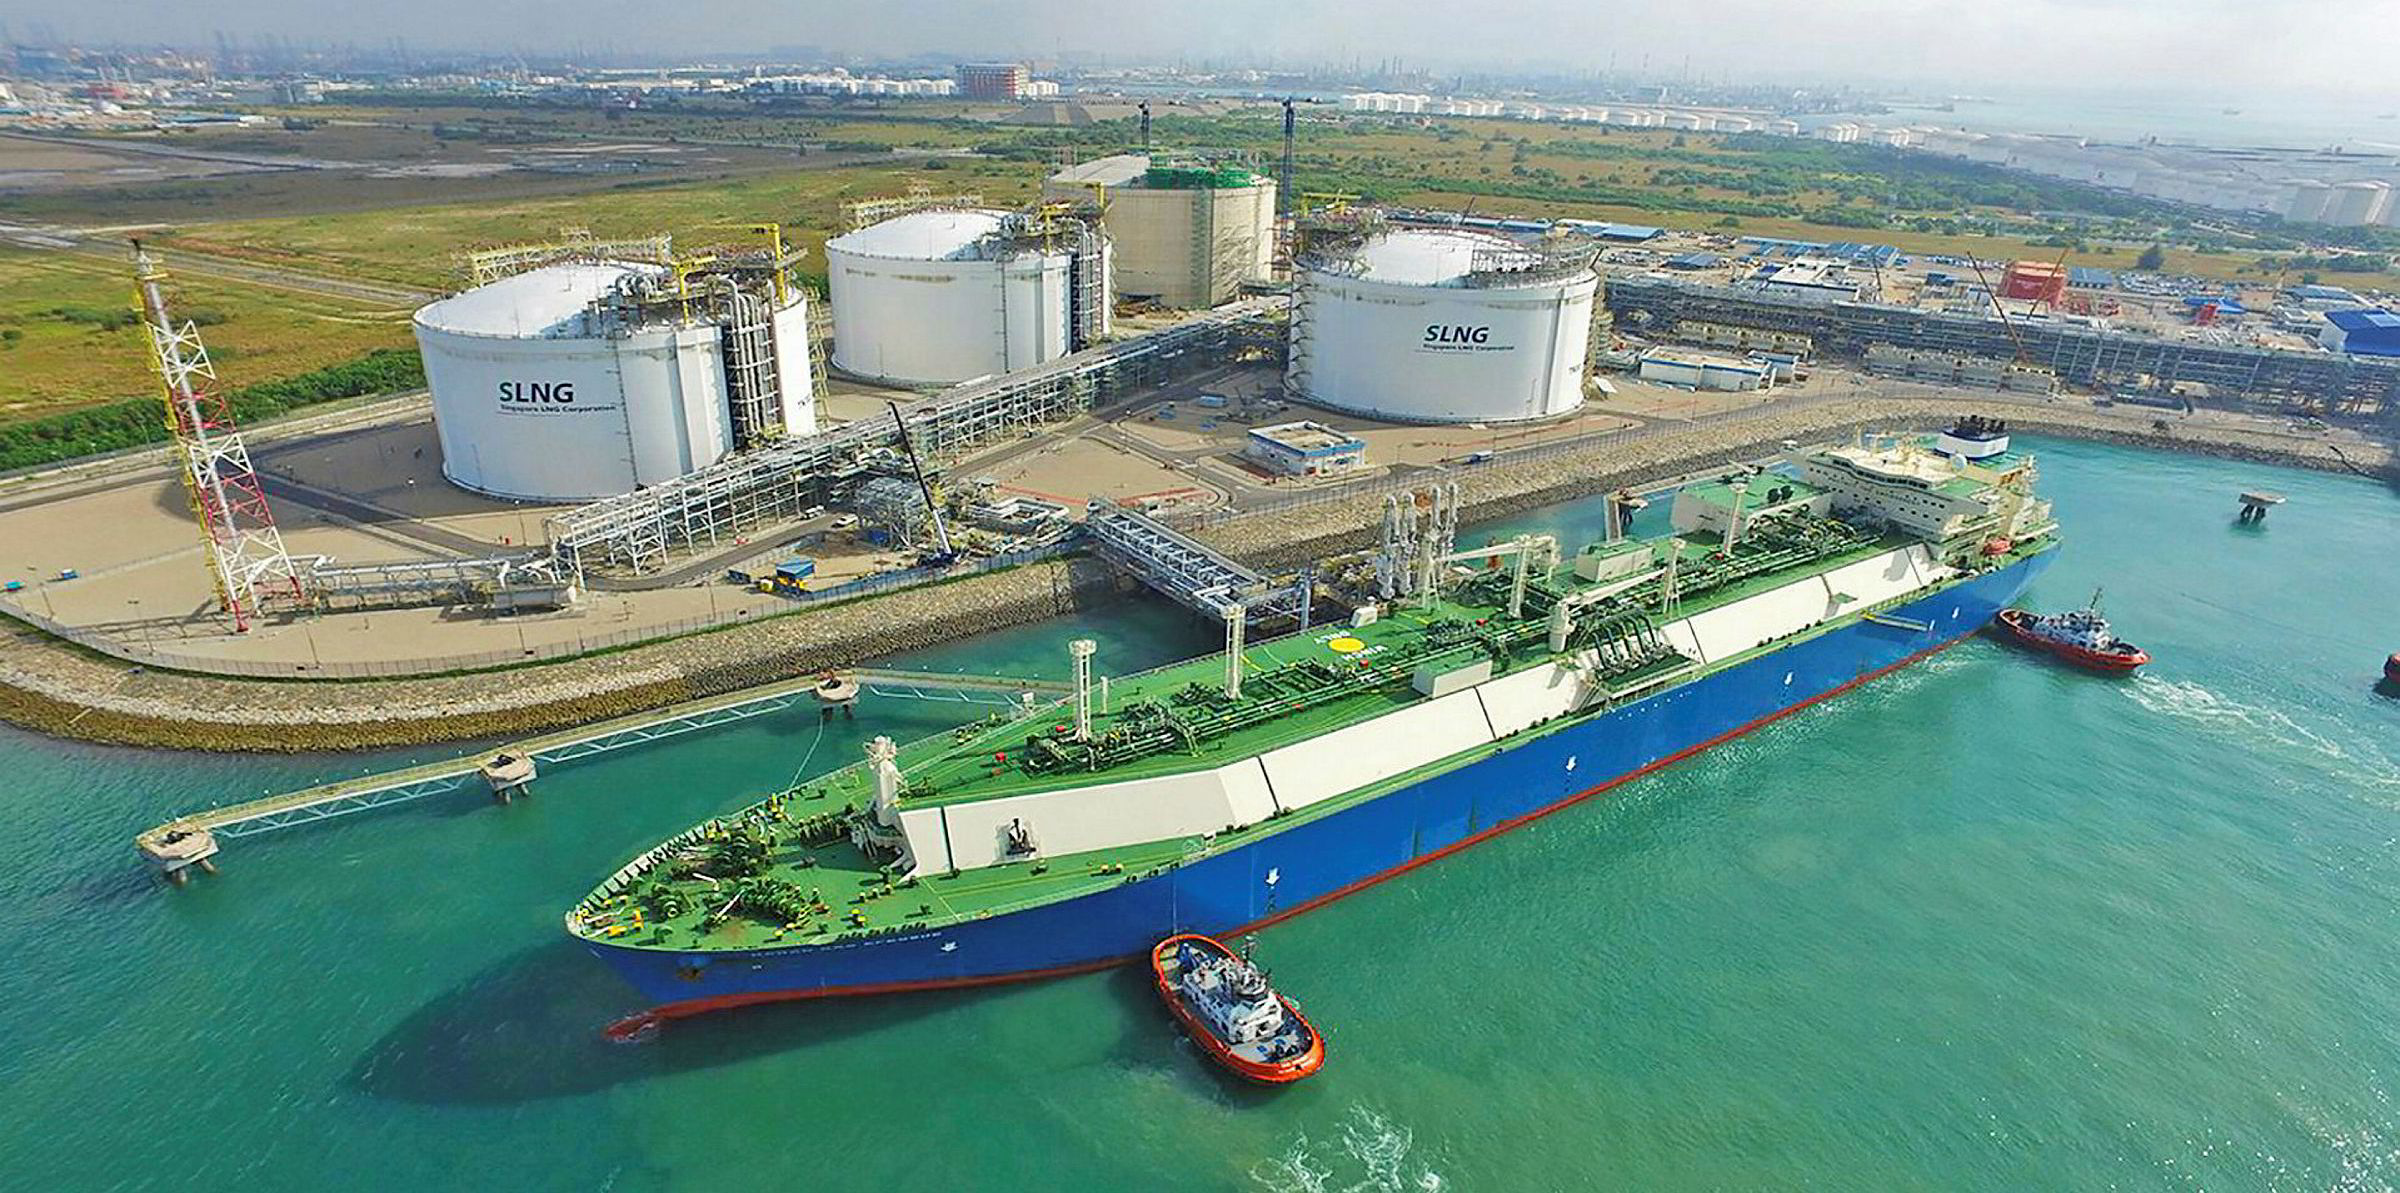 LNG import terminal. (Photo internet reproduction)